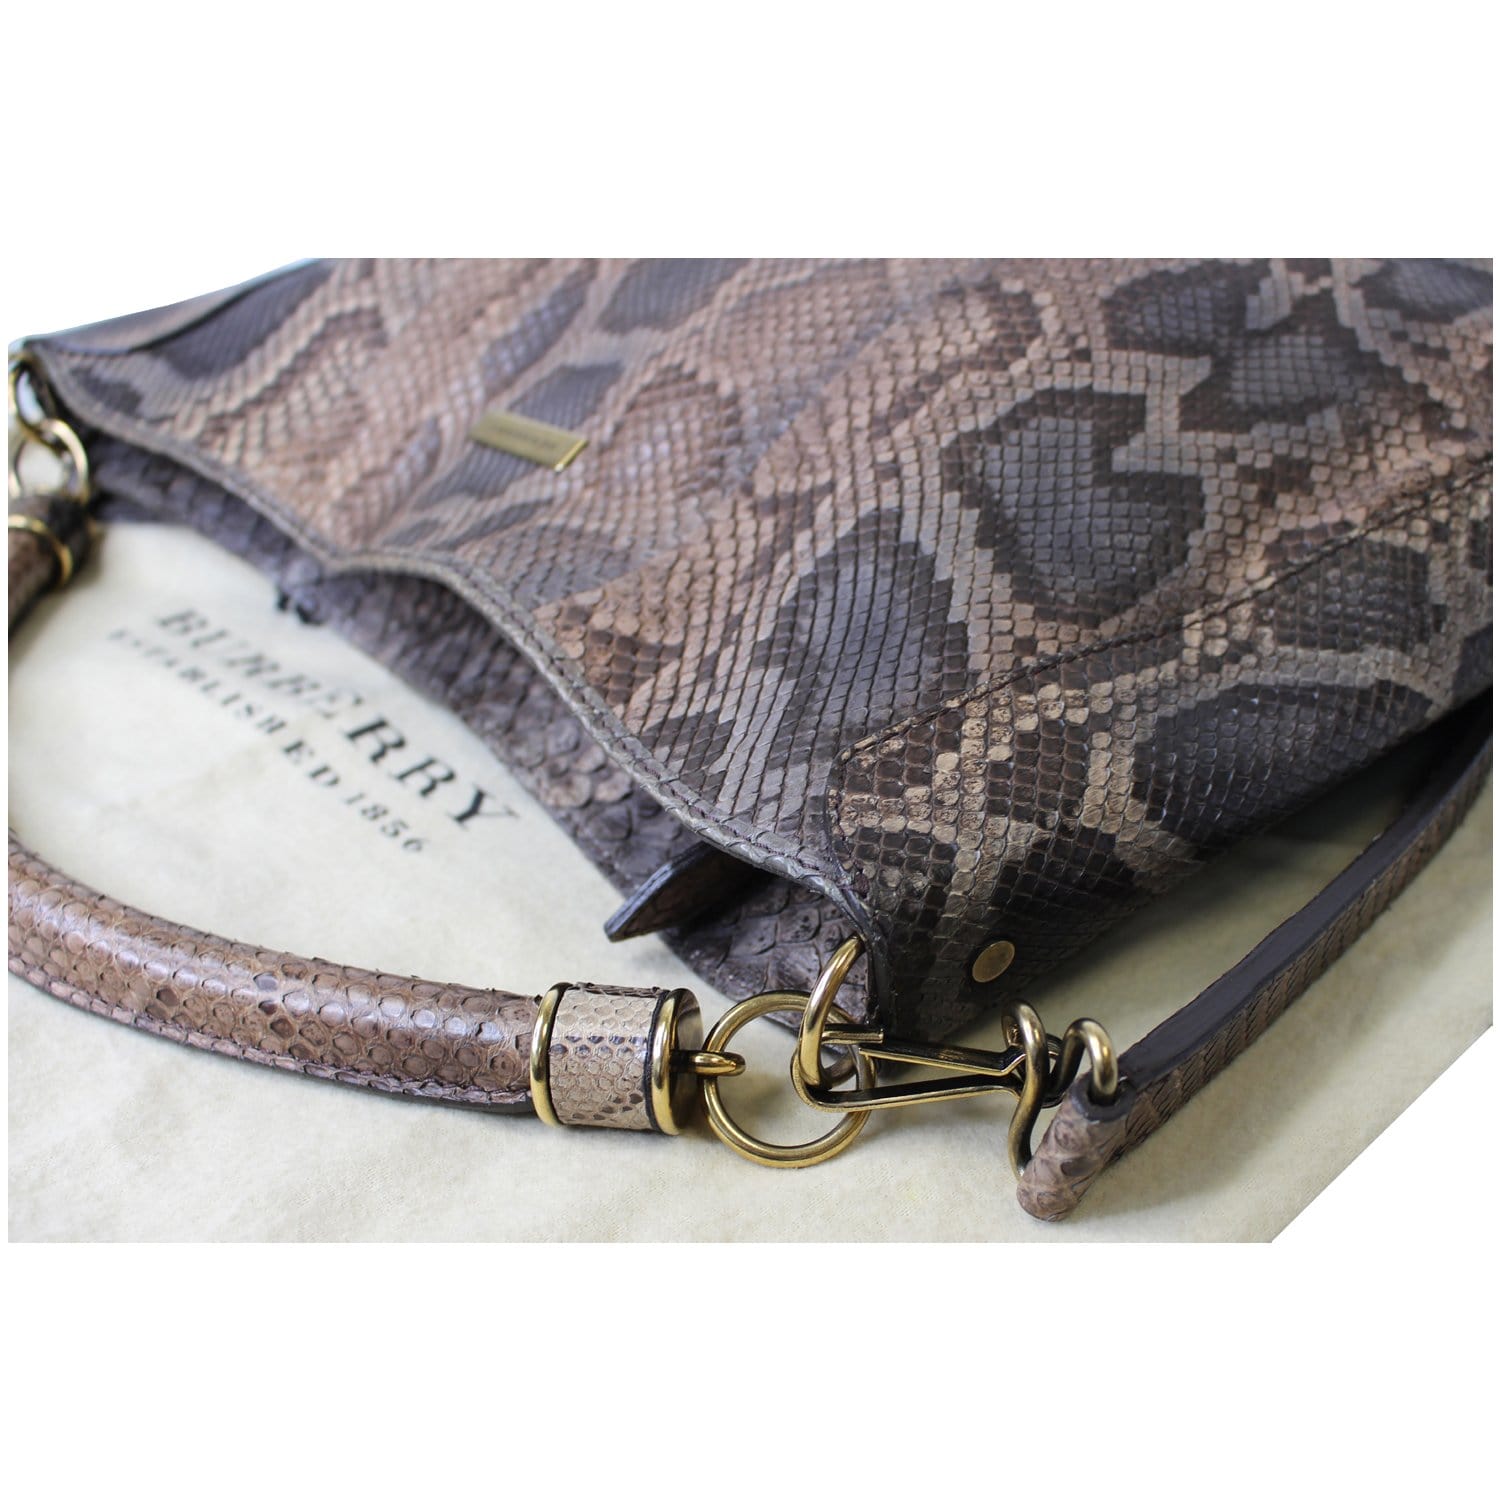 NWT BURBERRY PYTHON LEATHER BUCKLE TOTE SHOULDER BAG MADE IN ITALY